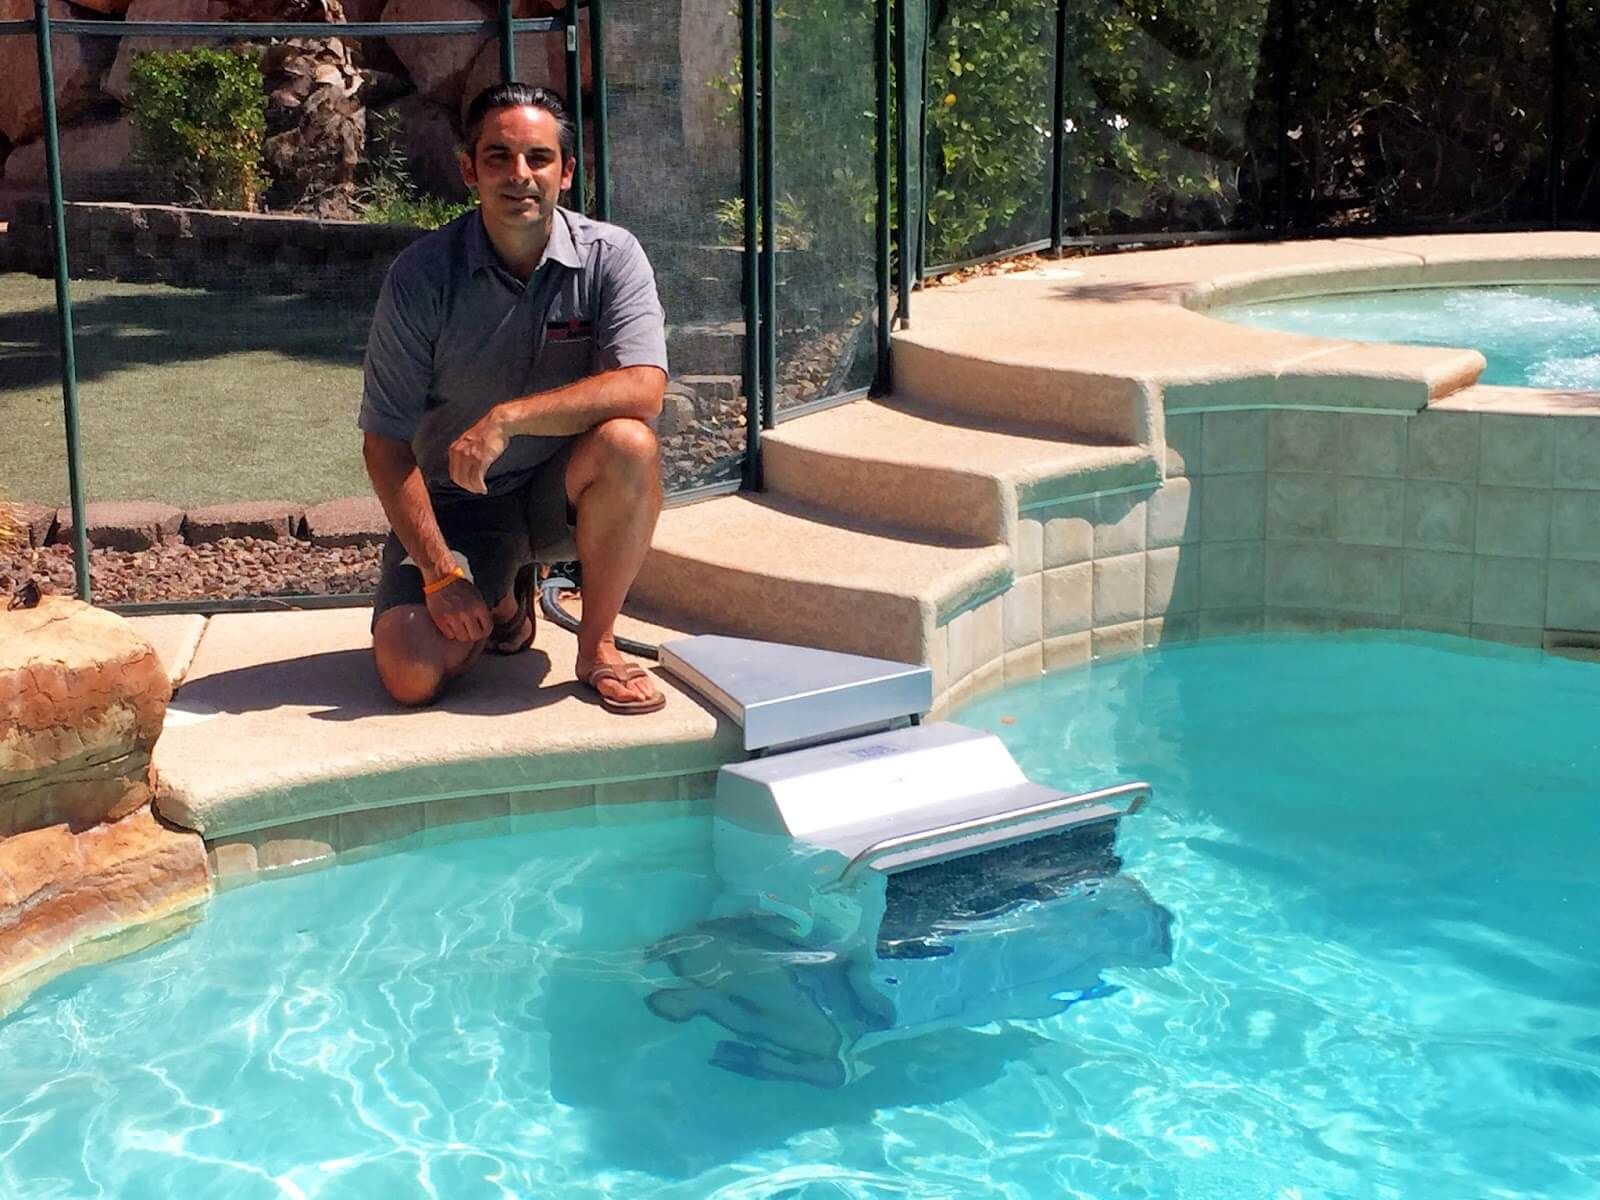 Rod S with the Endless Pools Fastlane he uses for Ironman triathlon training